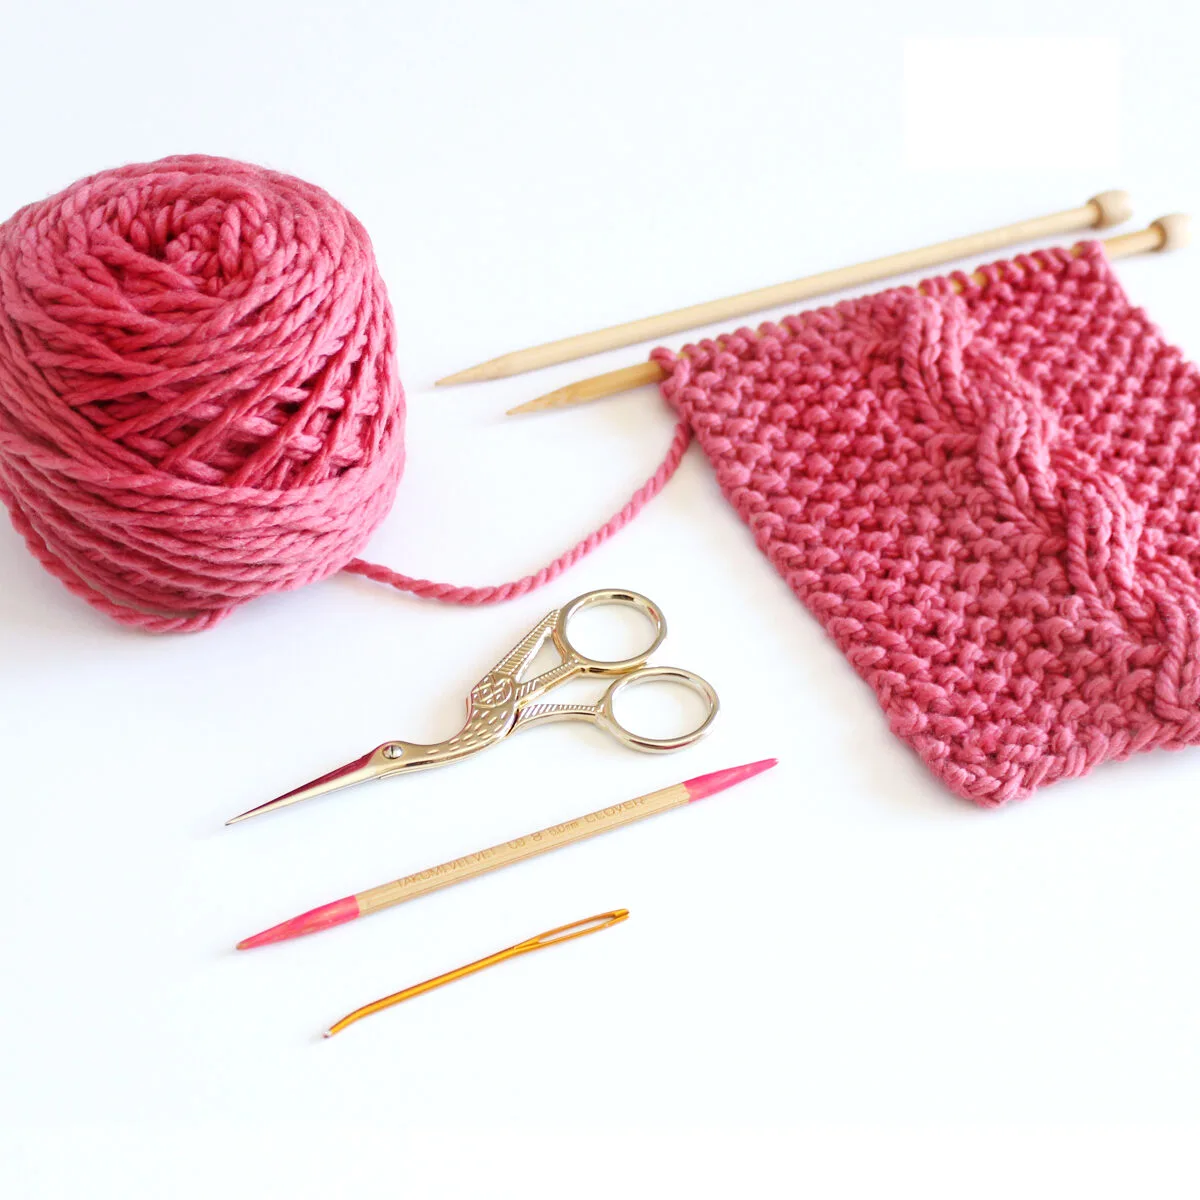 Knitting supplies with Cable Ribbles, yarn, knitting needles, cable needle, tapestry needle, and scissors.